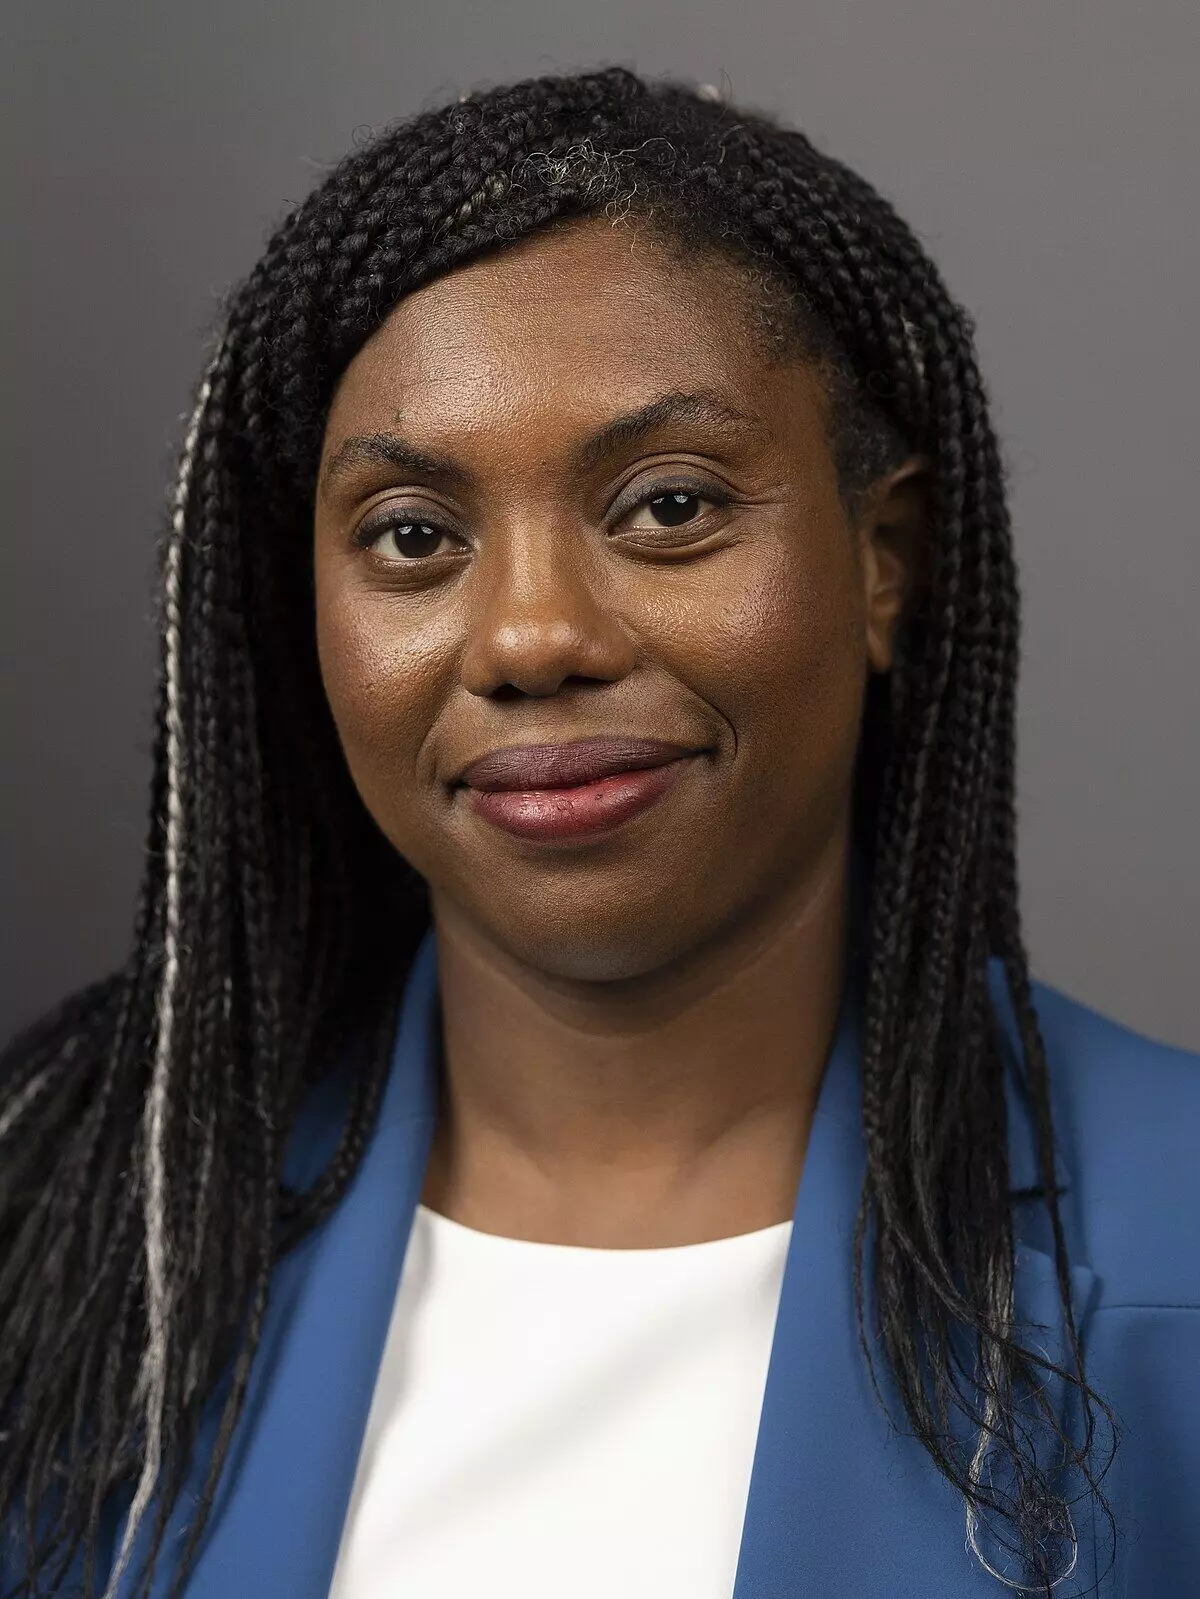 UK Secretary of State for Business and Trade Kemi Badenoch